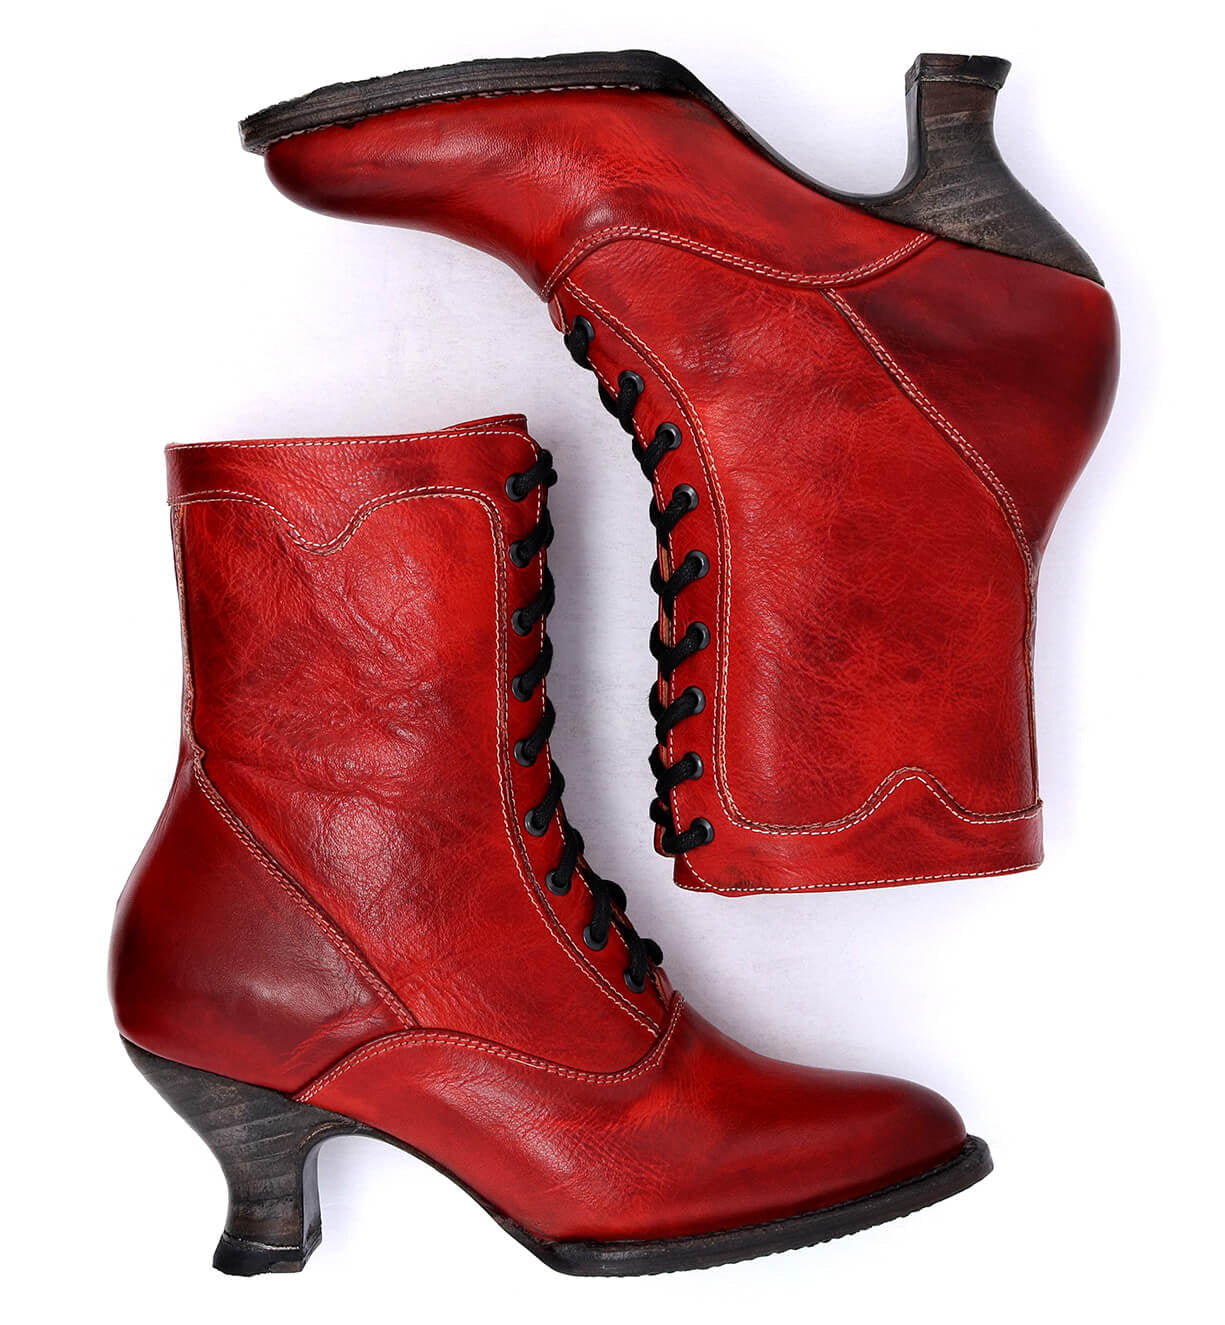 A pair of Oak Tree Farms Eleanor hand dyed red leather boots on a white background, showcasing uncompromising quality.